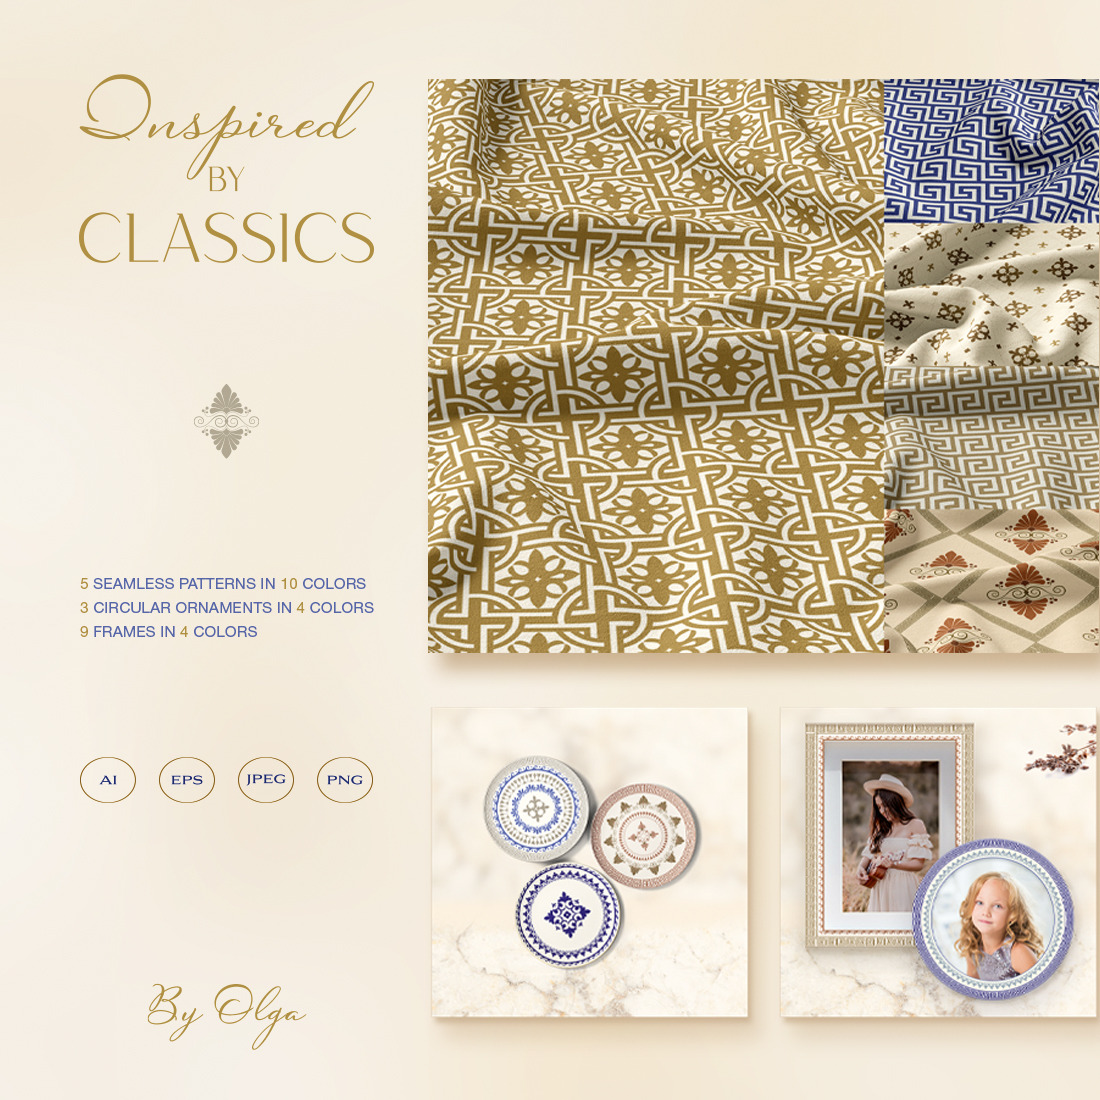 Seamless Patterns, Circular Ornaments and Frames in a Modern classic style cover image.